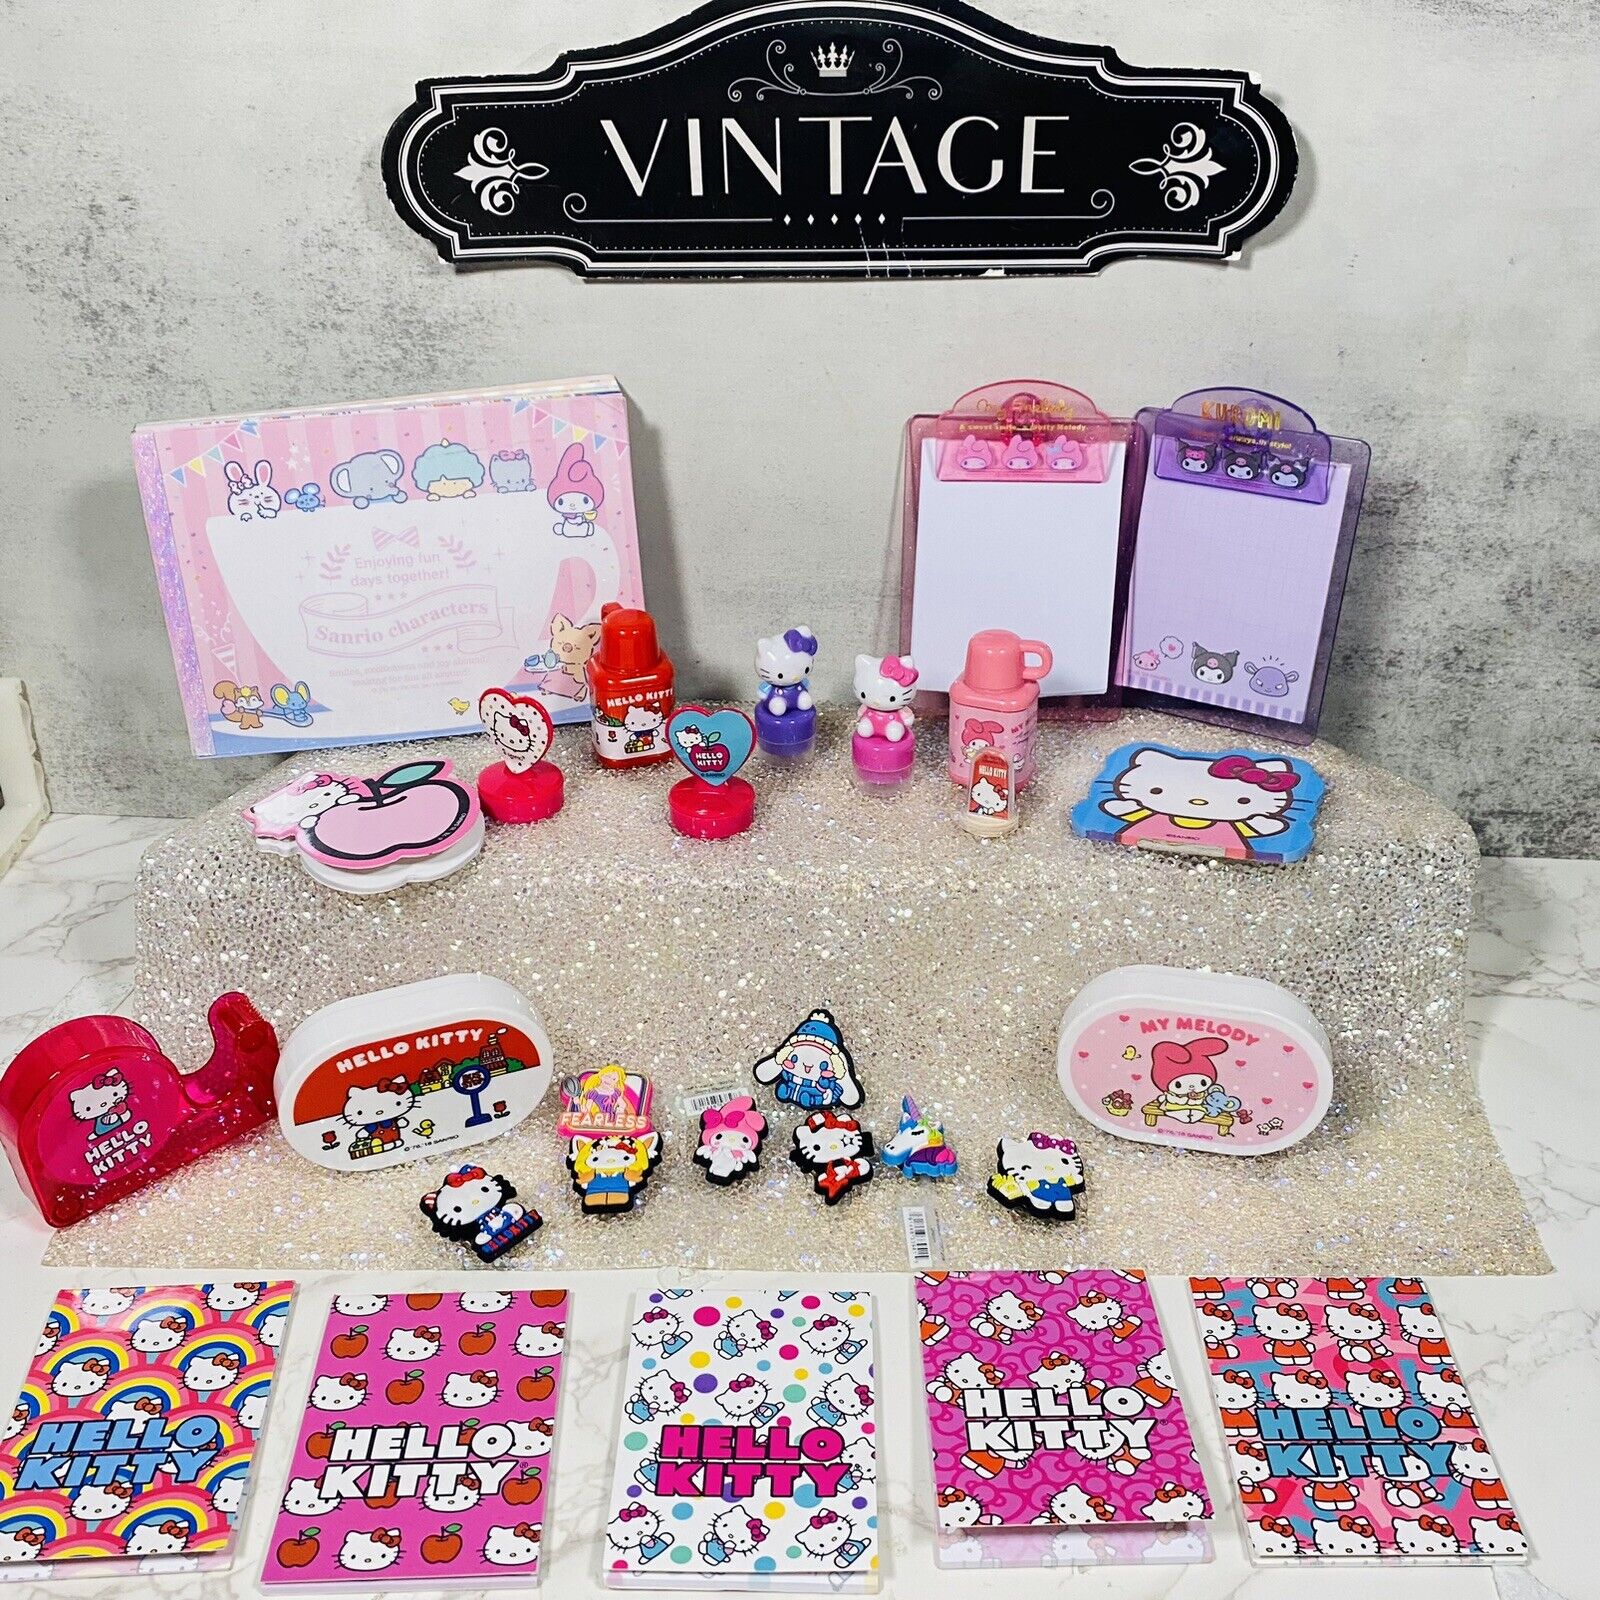 VTG 1990s-00s Sanrio Hello Kitty Mixed Lot Of Notebooks, Croc Charms, Ink Stamps